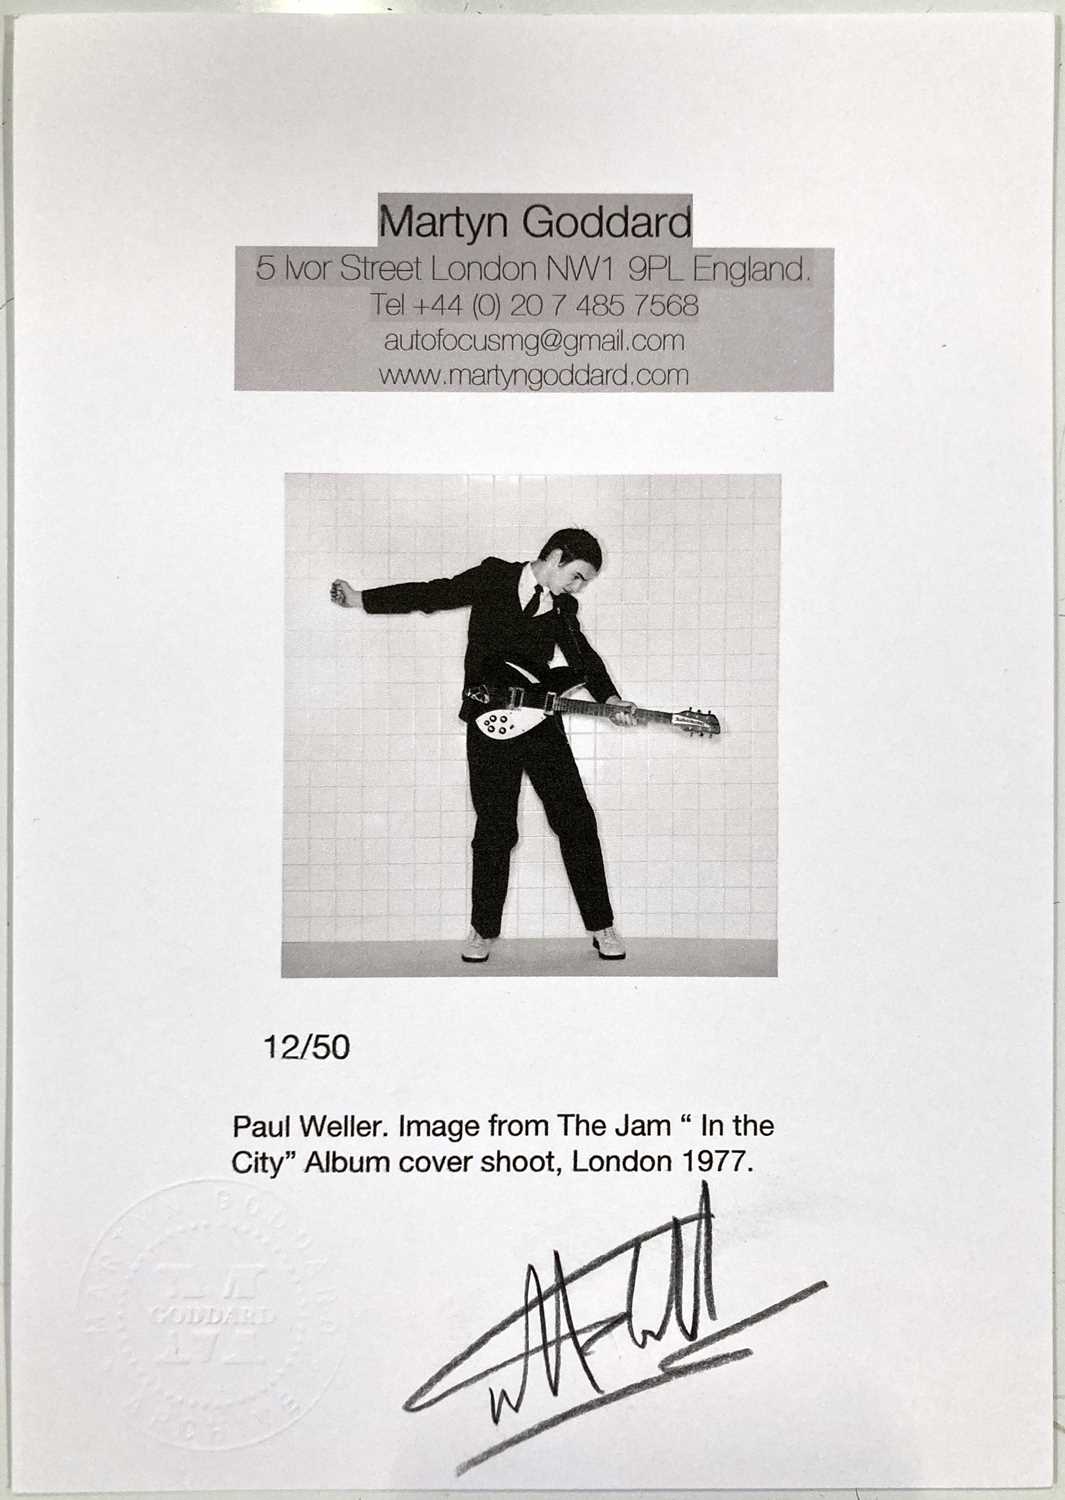 THE JAM - LIMITED EDITION SIGNED PHOTO PRINT BY MARTYN GODDARD. - Image 4 of 4